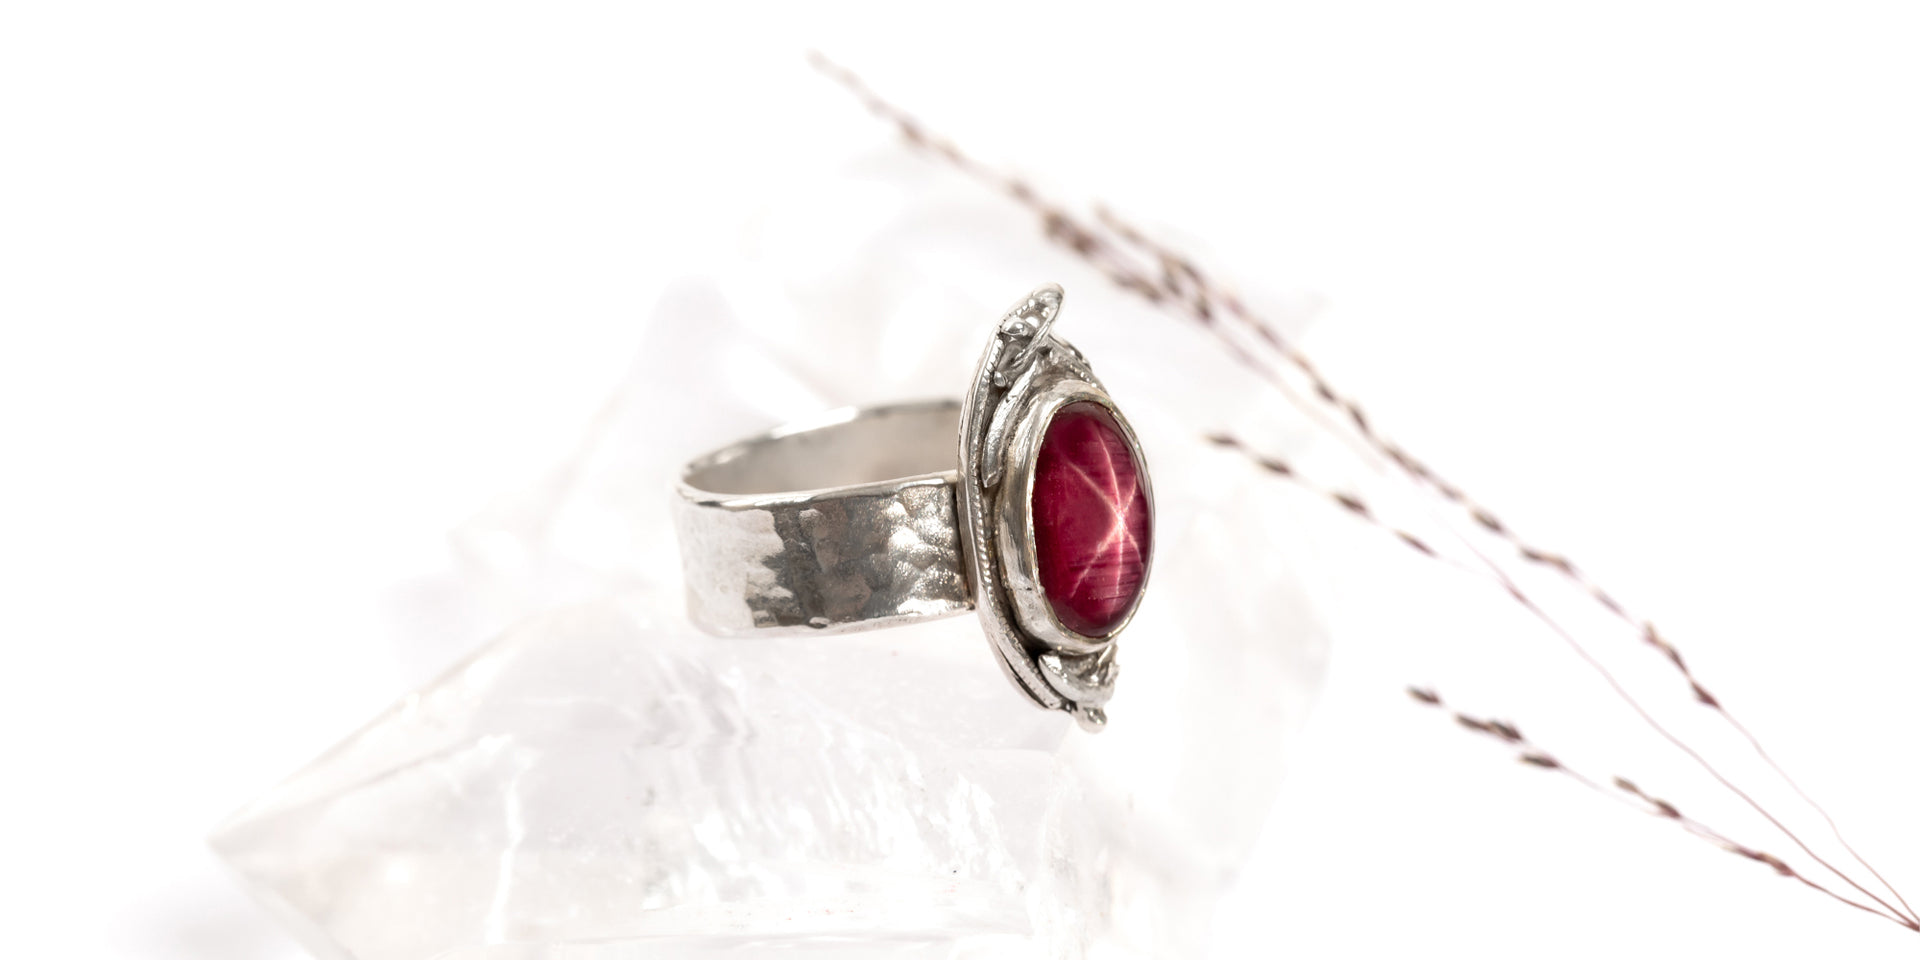 Maya Ullman Jewellery, Handmade ring made from recycled silver with red star Ruby 